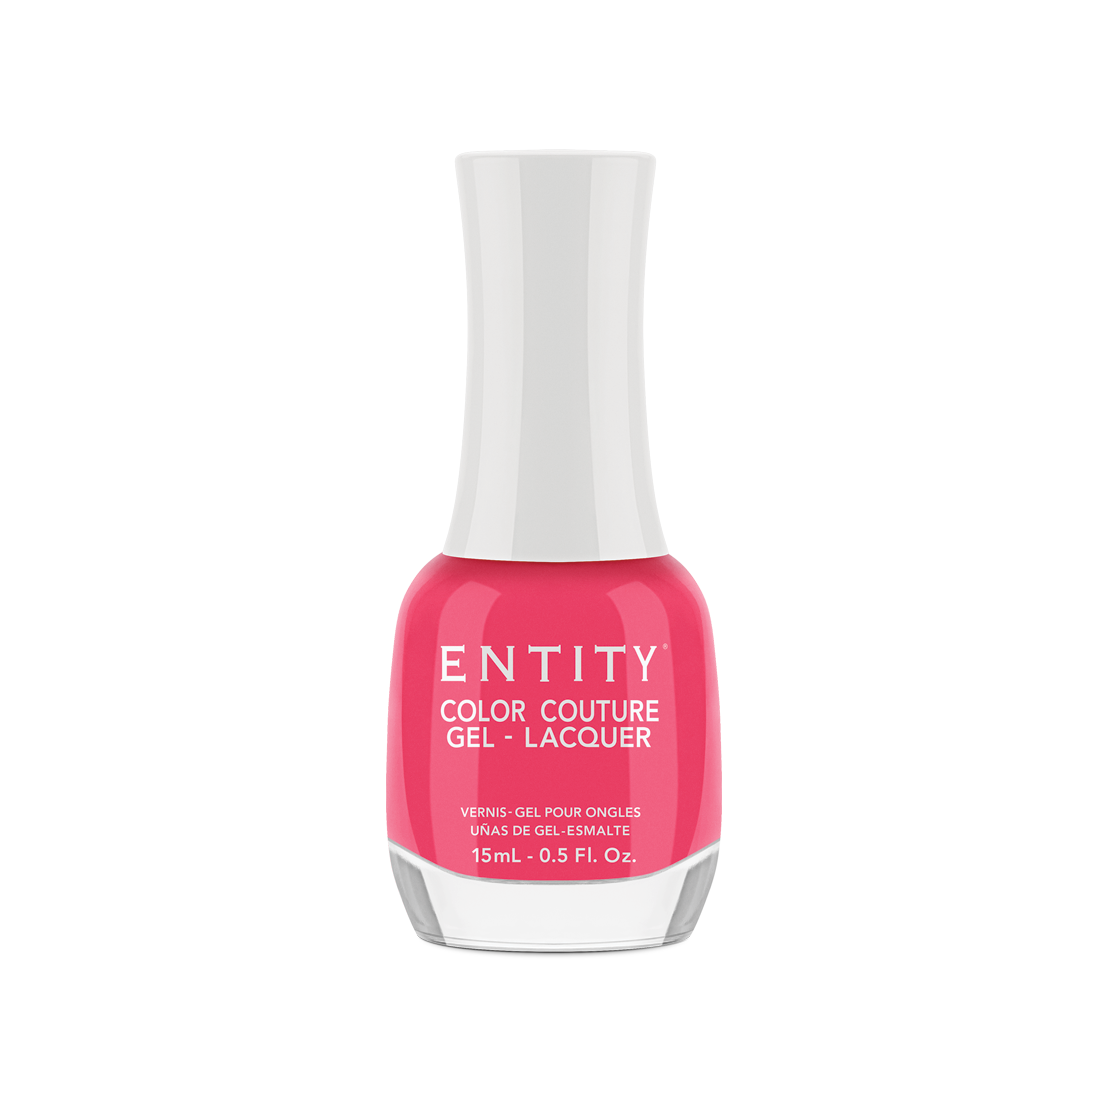 Entity Gel Lacquer - Barefoot and Beautiful 15 mL/0.5 Fl. Oz